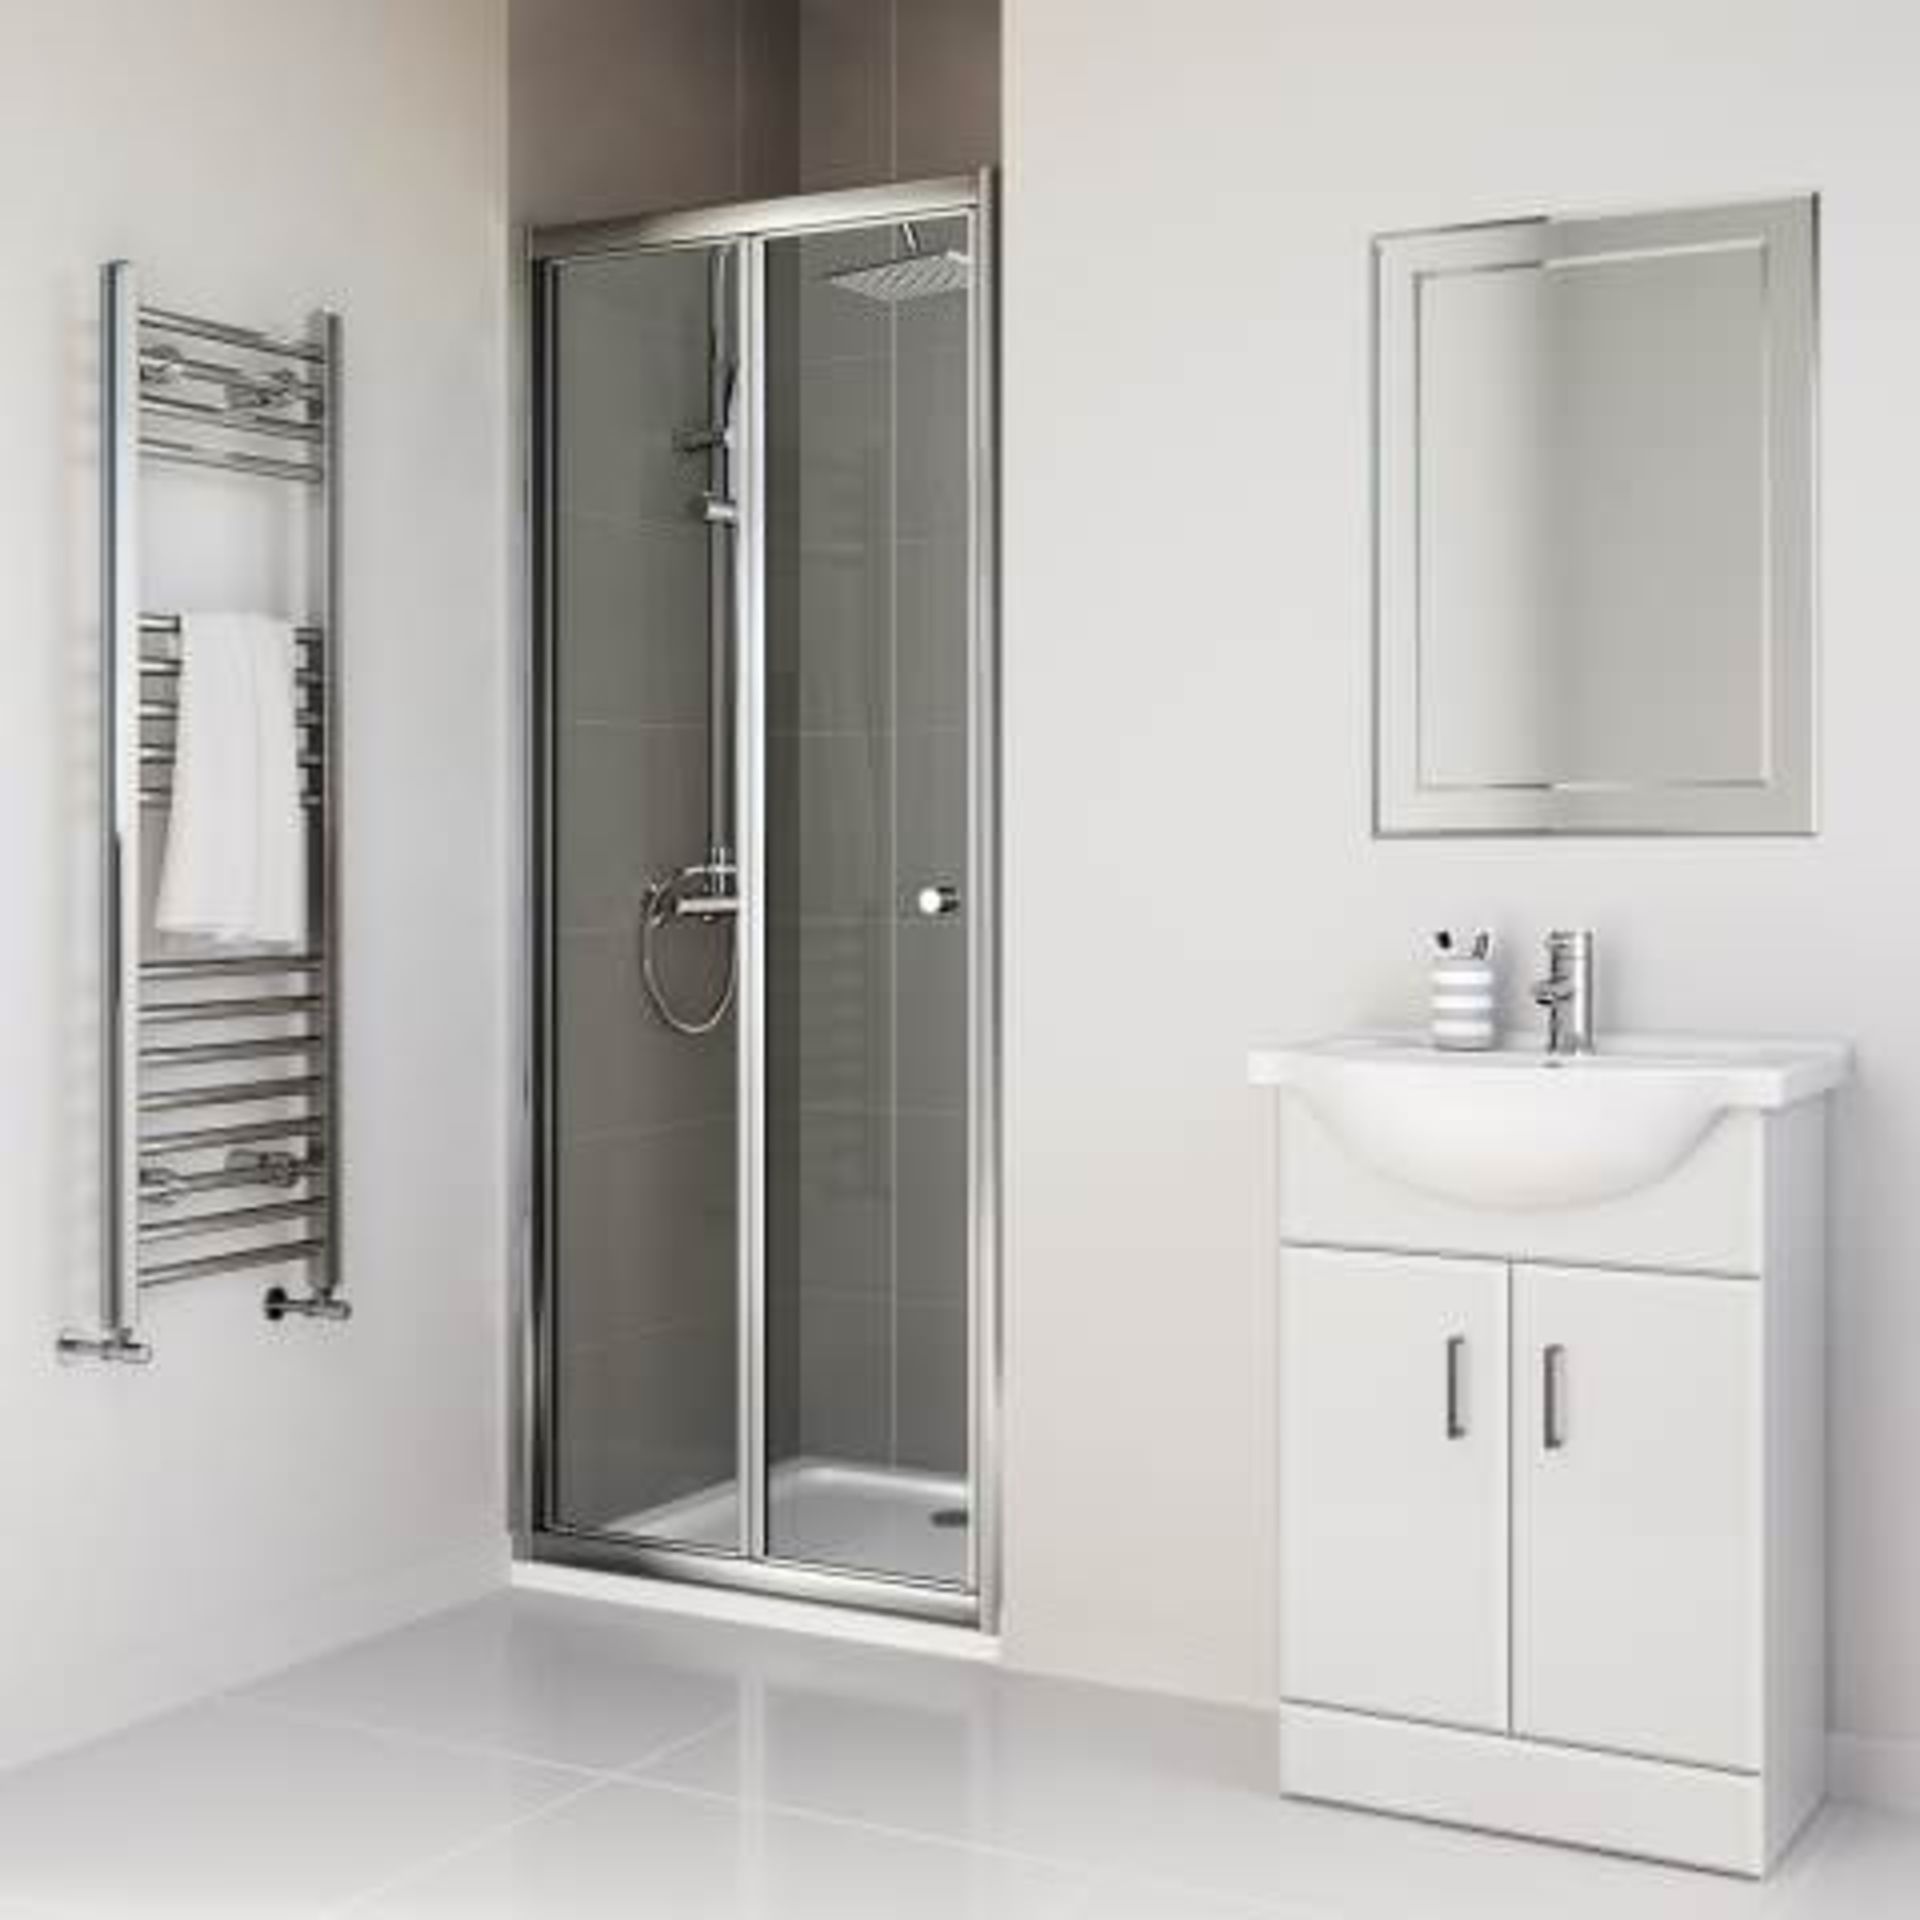 (T261) 700mm - Elements Bi Fold Shower Door RRP £299.99. Do you have an awkward nook or a tricky - Image 3 of 9